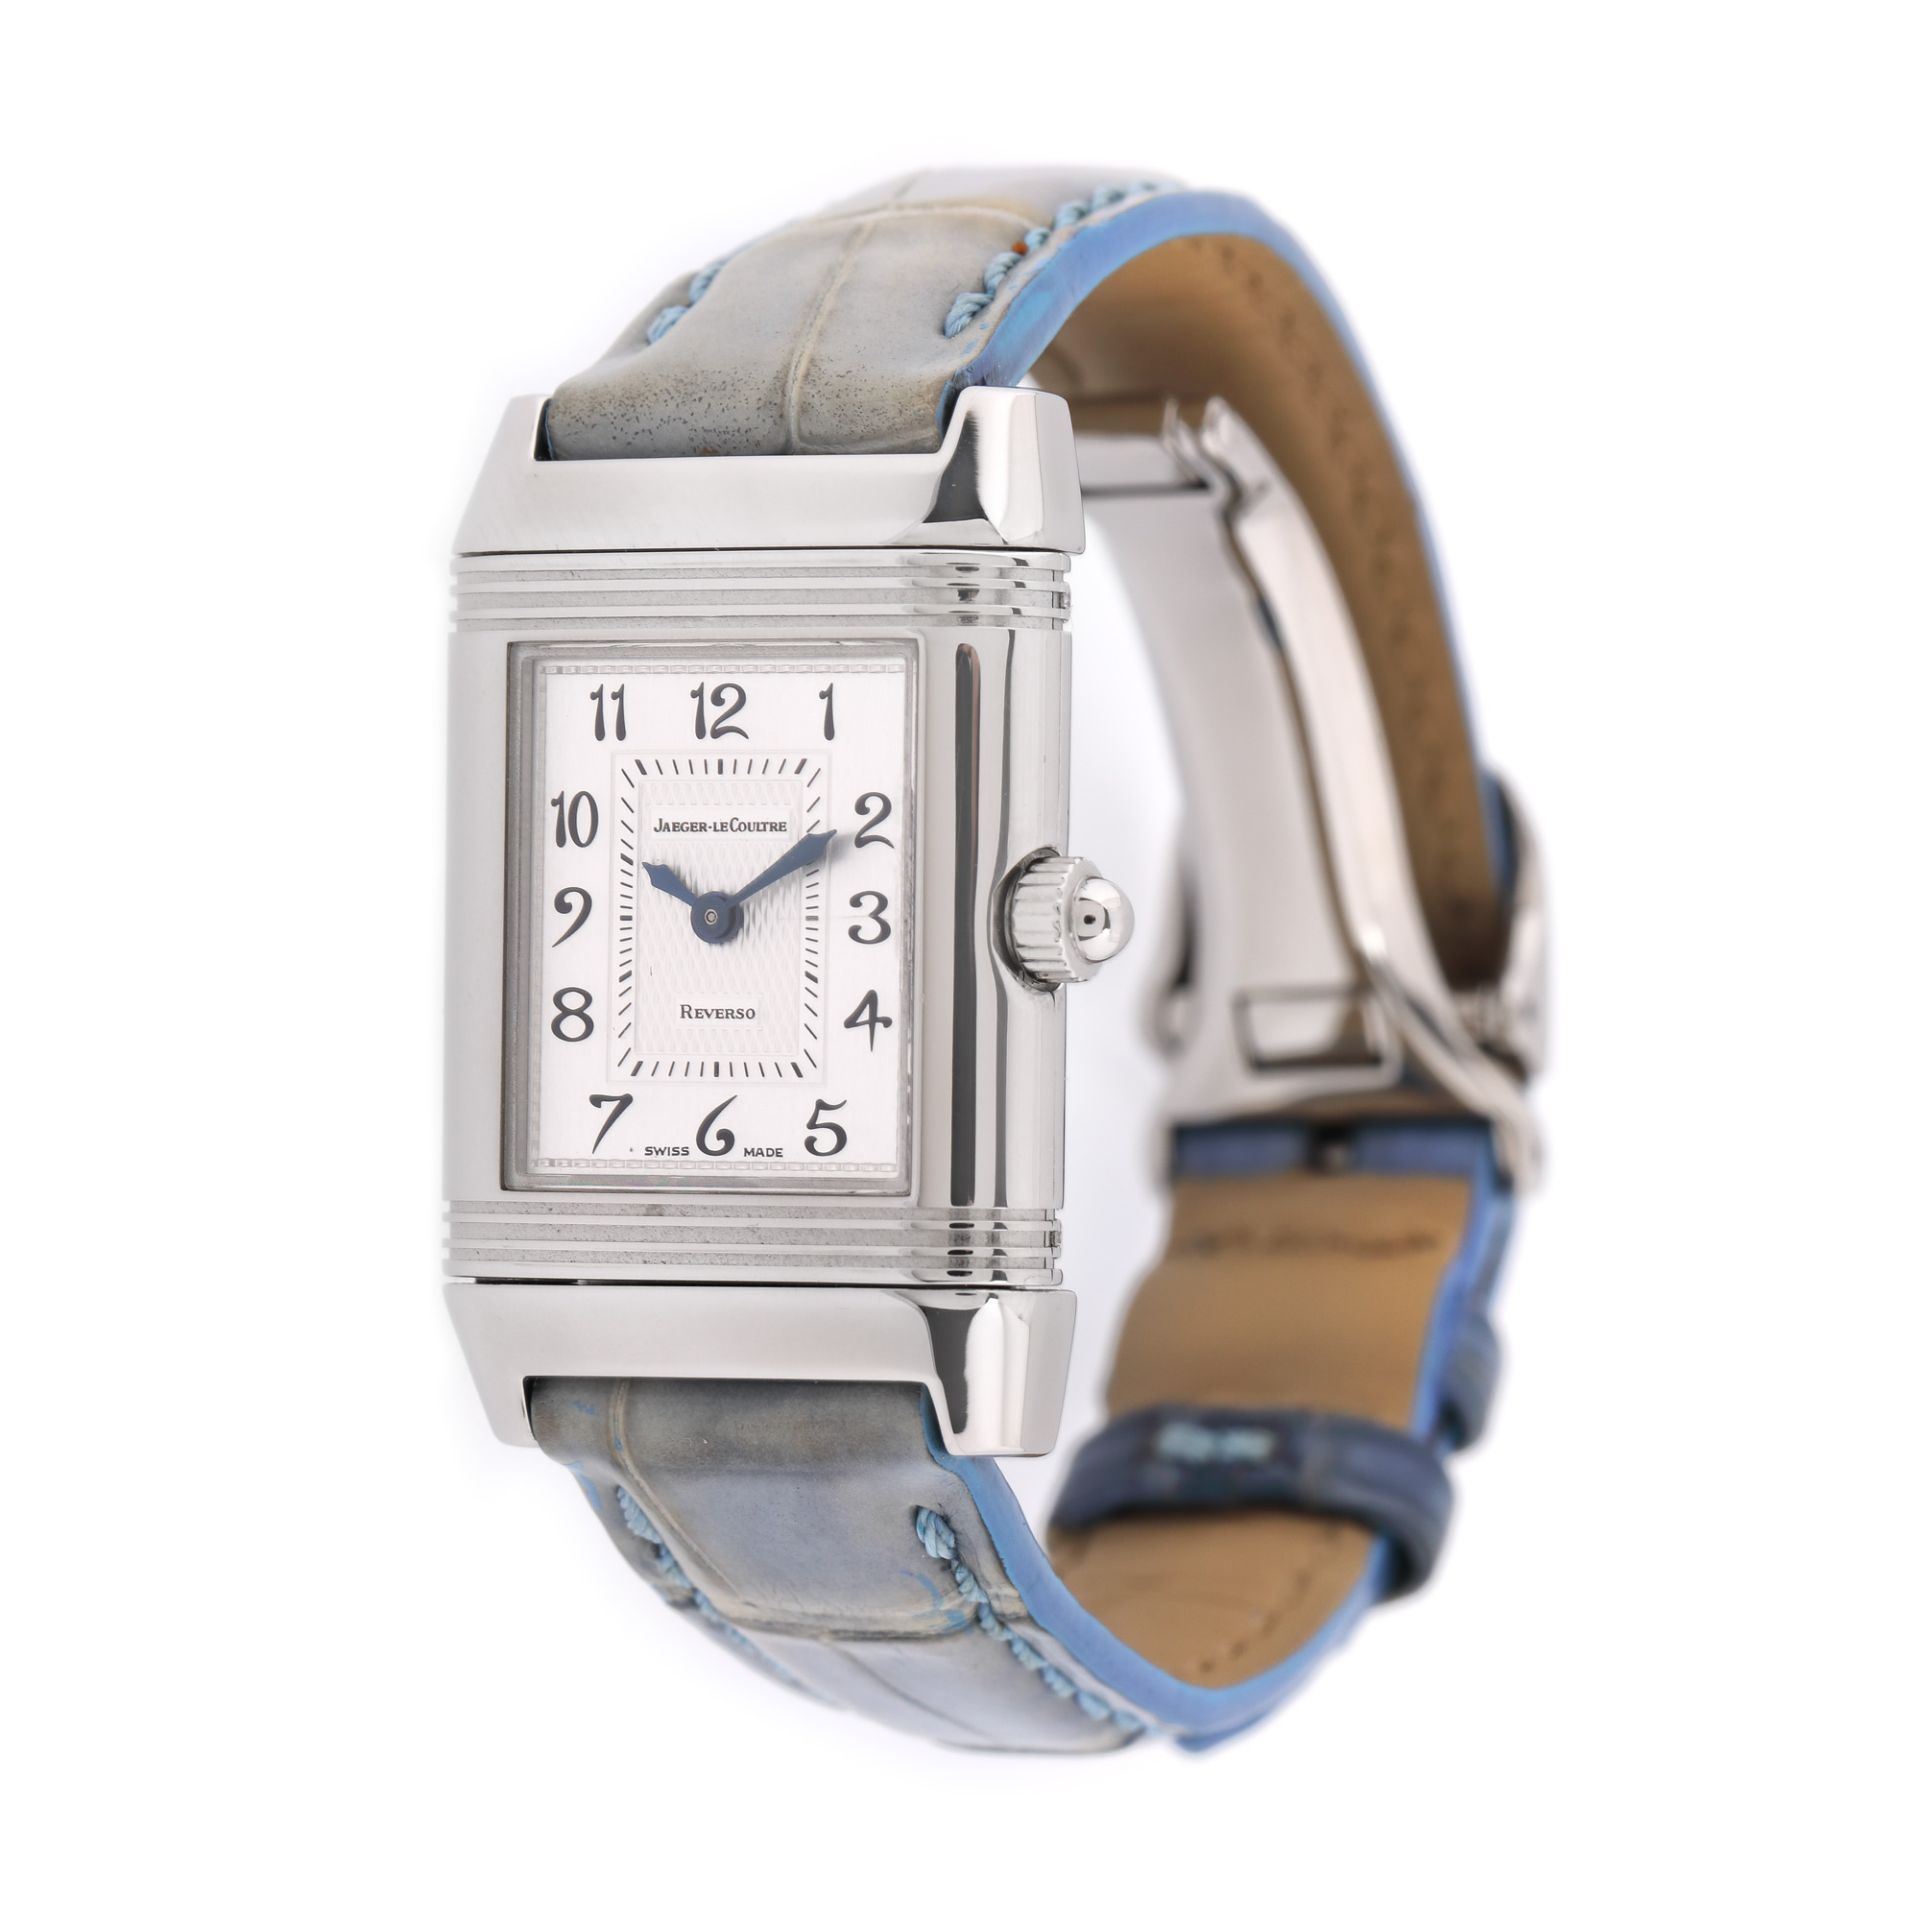 Jaeger-LeCoultre Reverso wristwatch, women, adorned with diamonds